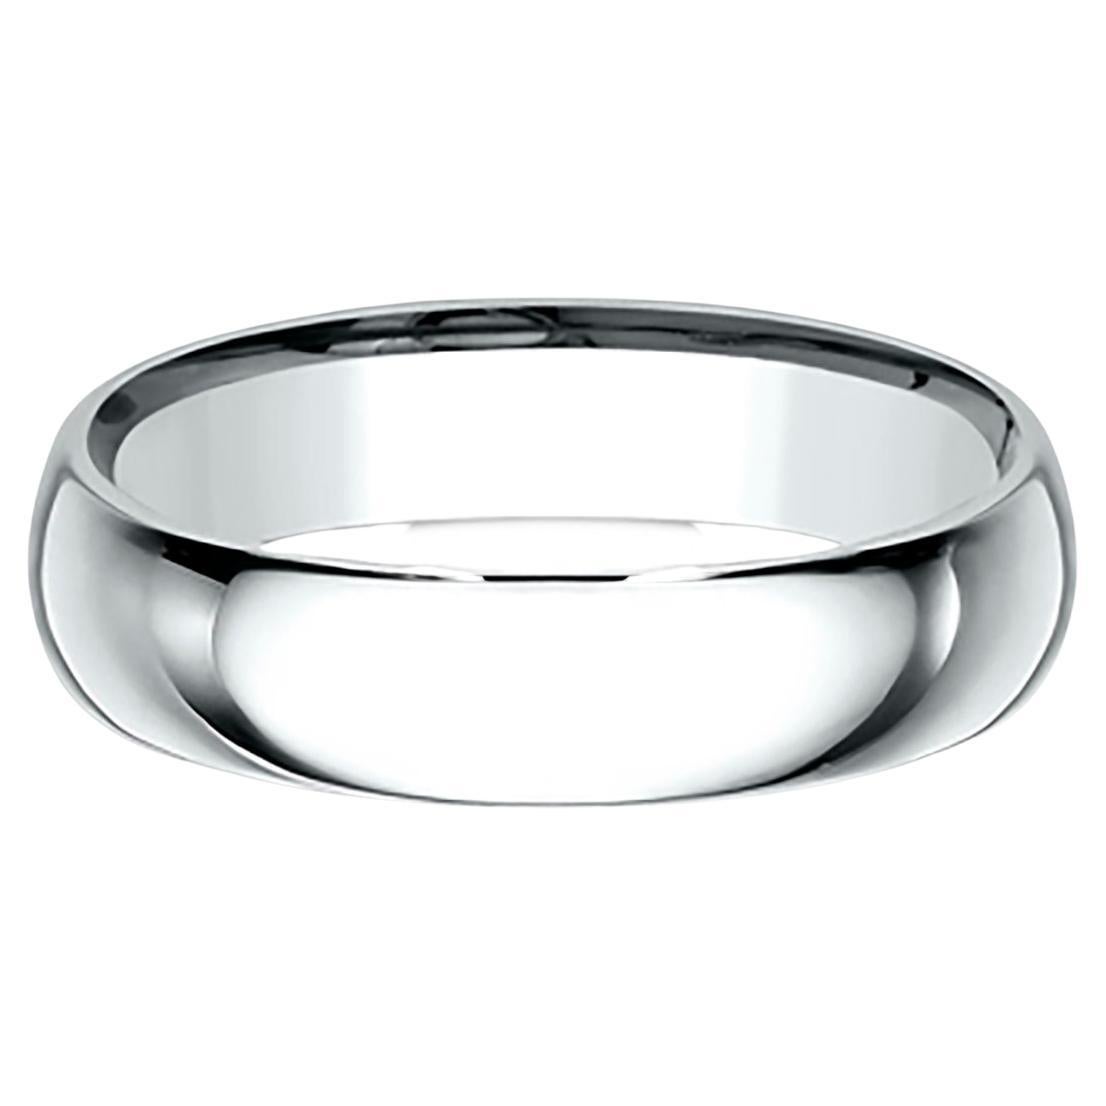 Benchmark Classic Comfort Fit Wedding Band in Platinum, Width 5mm